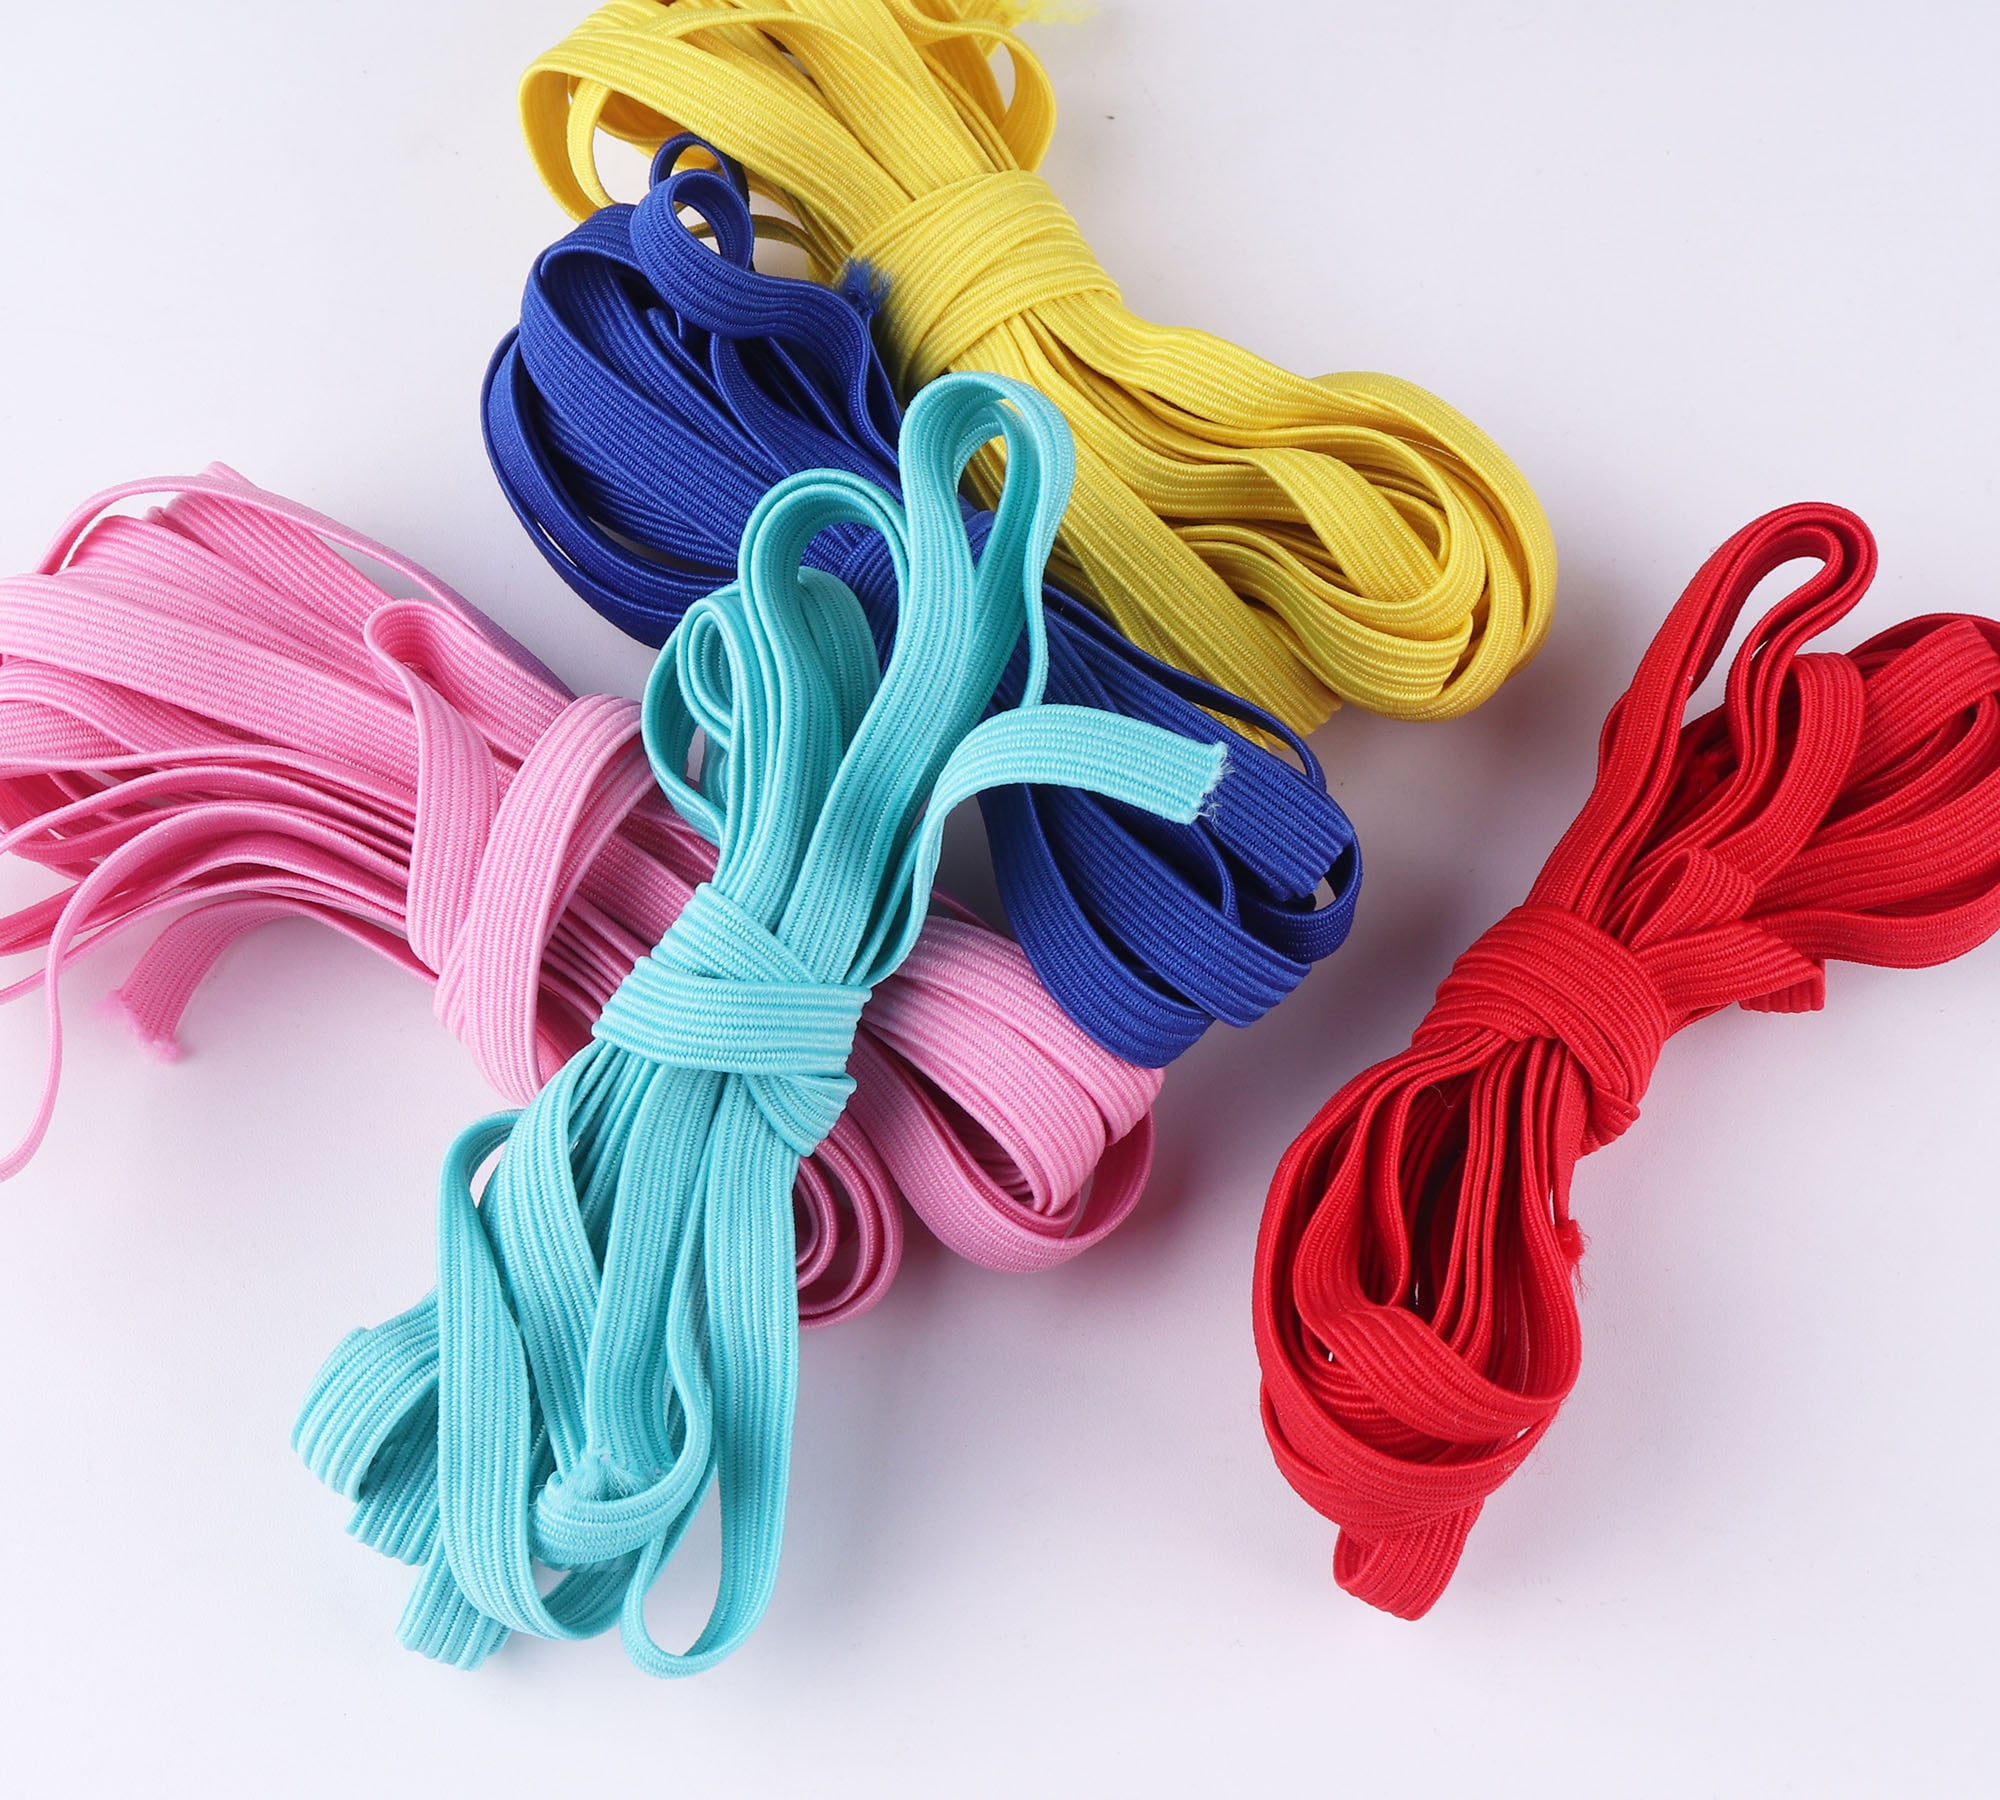 5mm Round Stretch Band Elastic Cord Ropes Material Costume Clothing Crafts Multi 